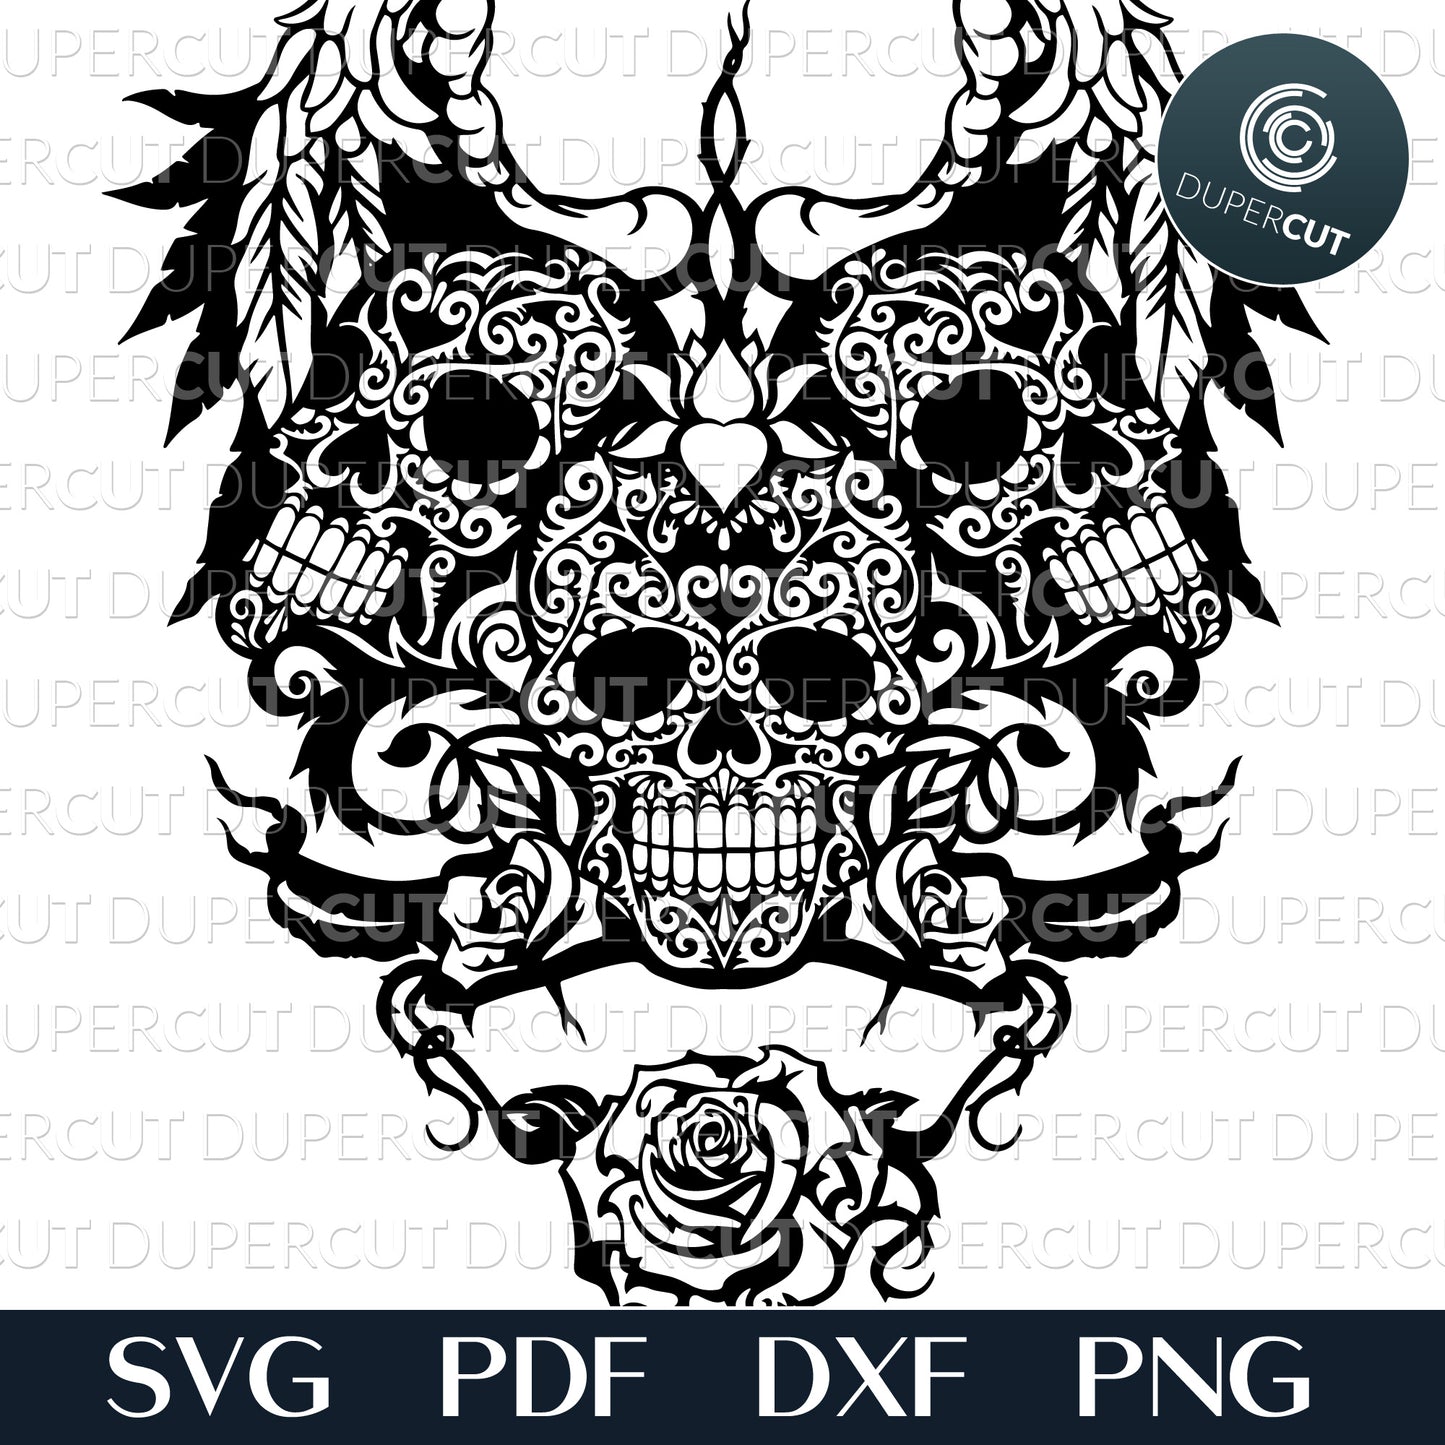 Winged skulls gothic tattoo template. SVG PNG DXF cutting files for Glowforge, Cricut, Silhouette cameo, laser engraving.